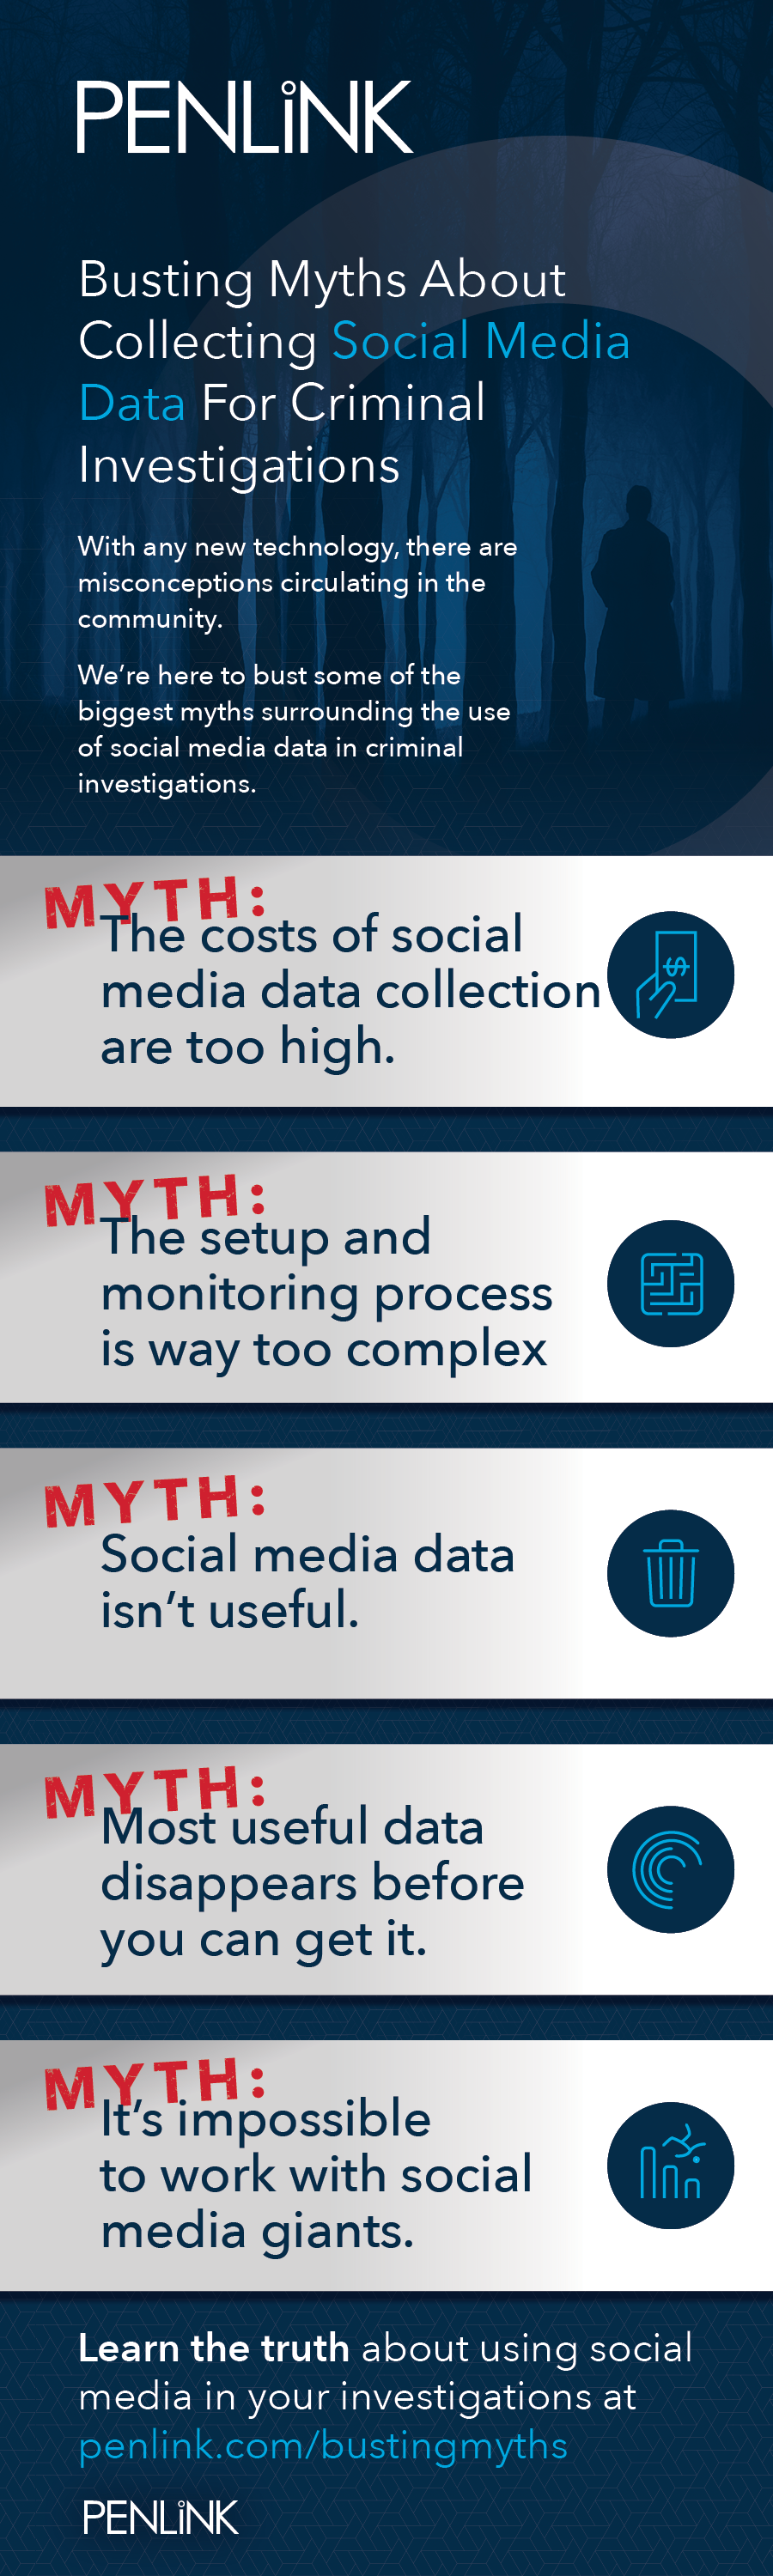 Busting Myths About Collecting Social Media Data For Criminal Investigations